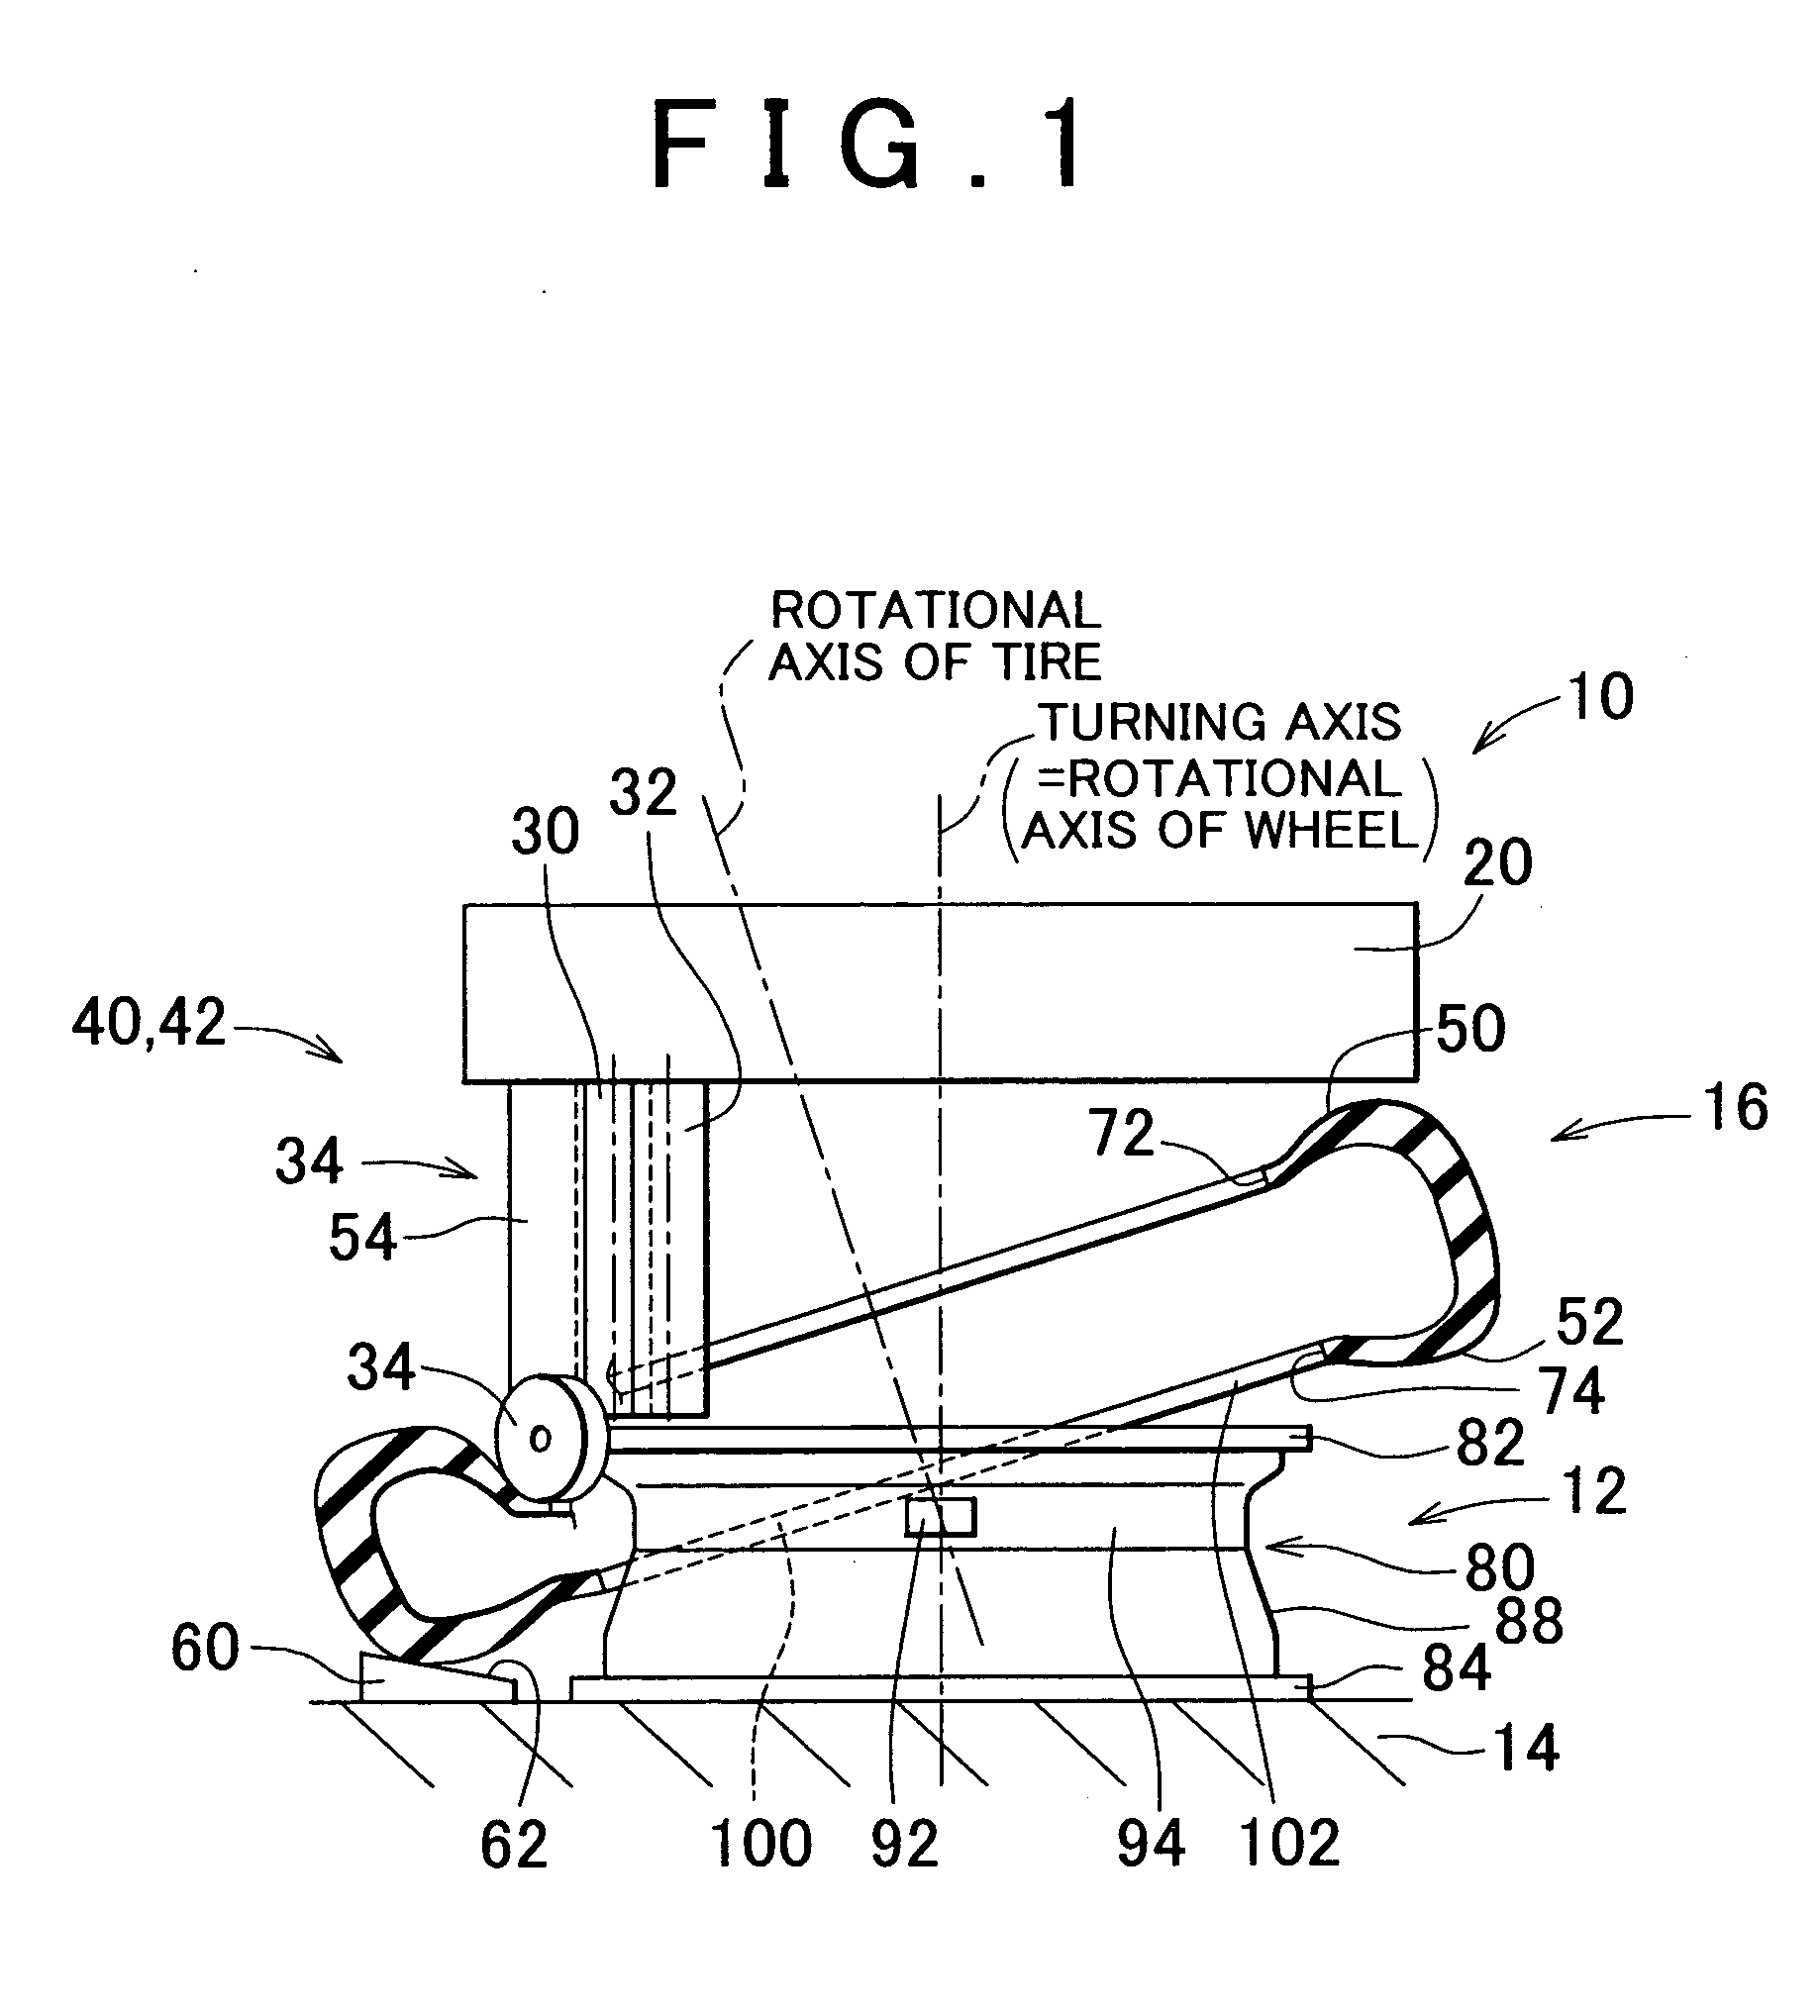 Tire fitting method and device